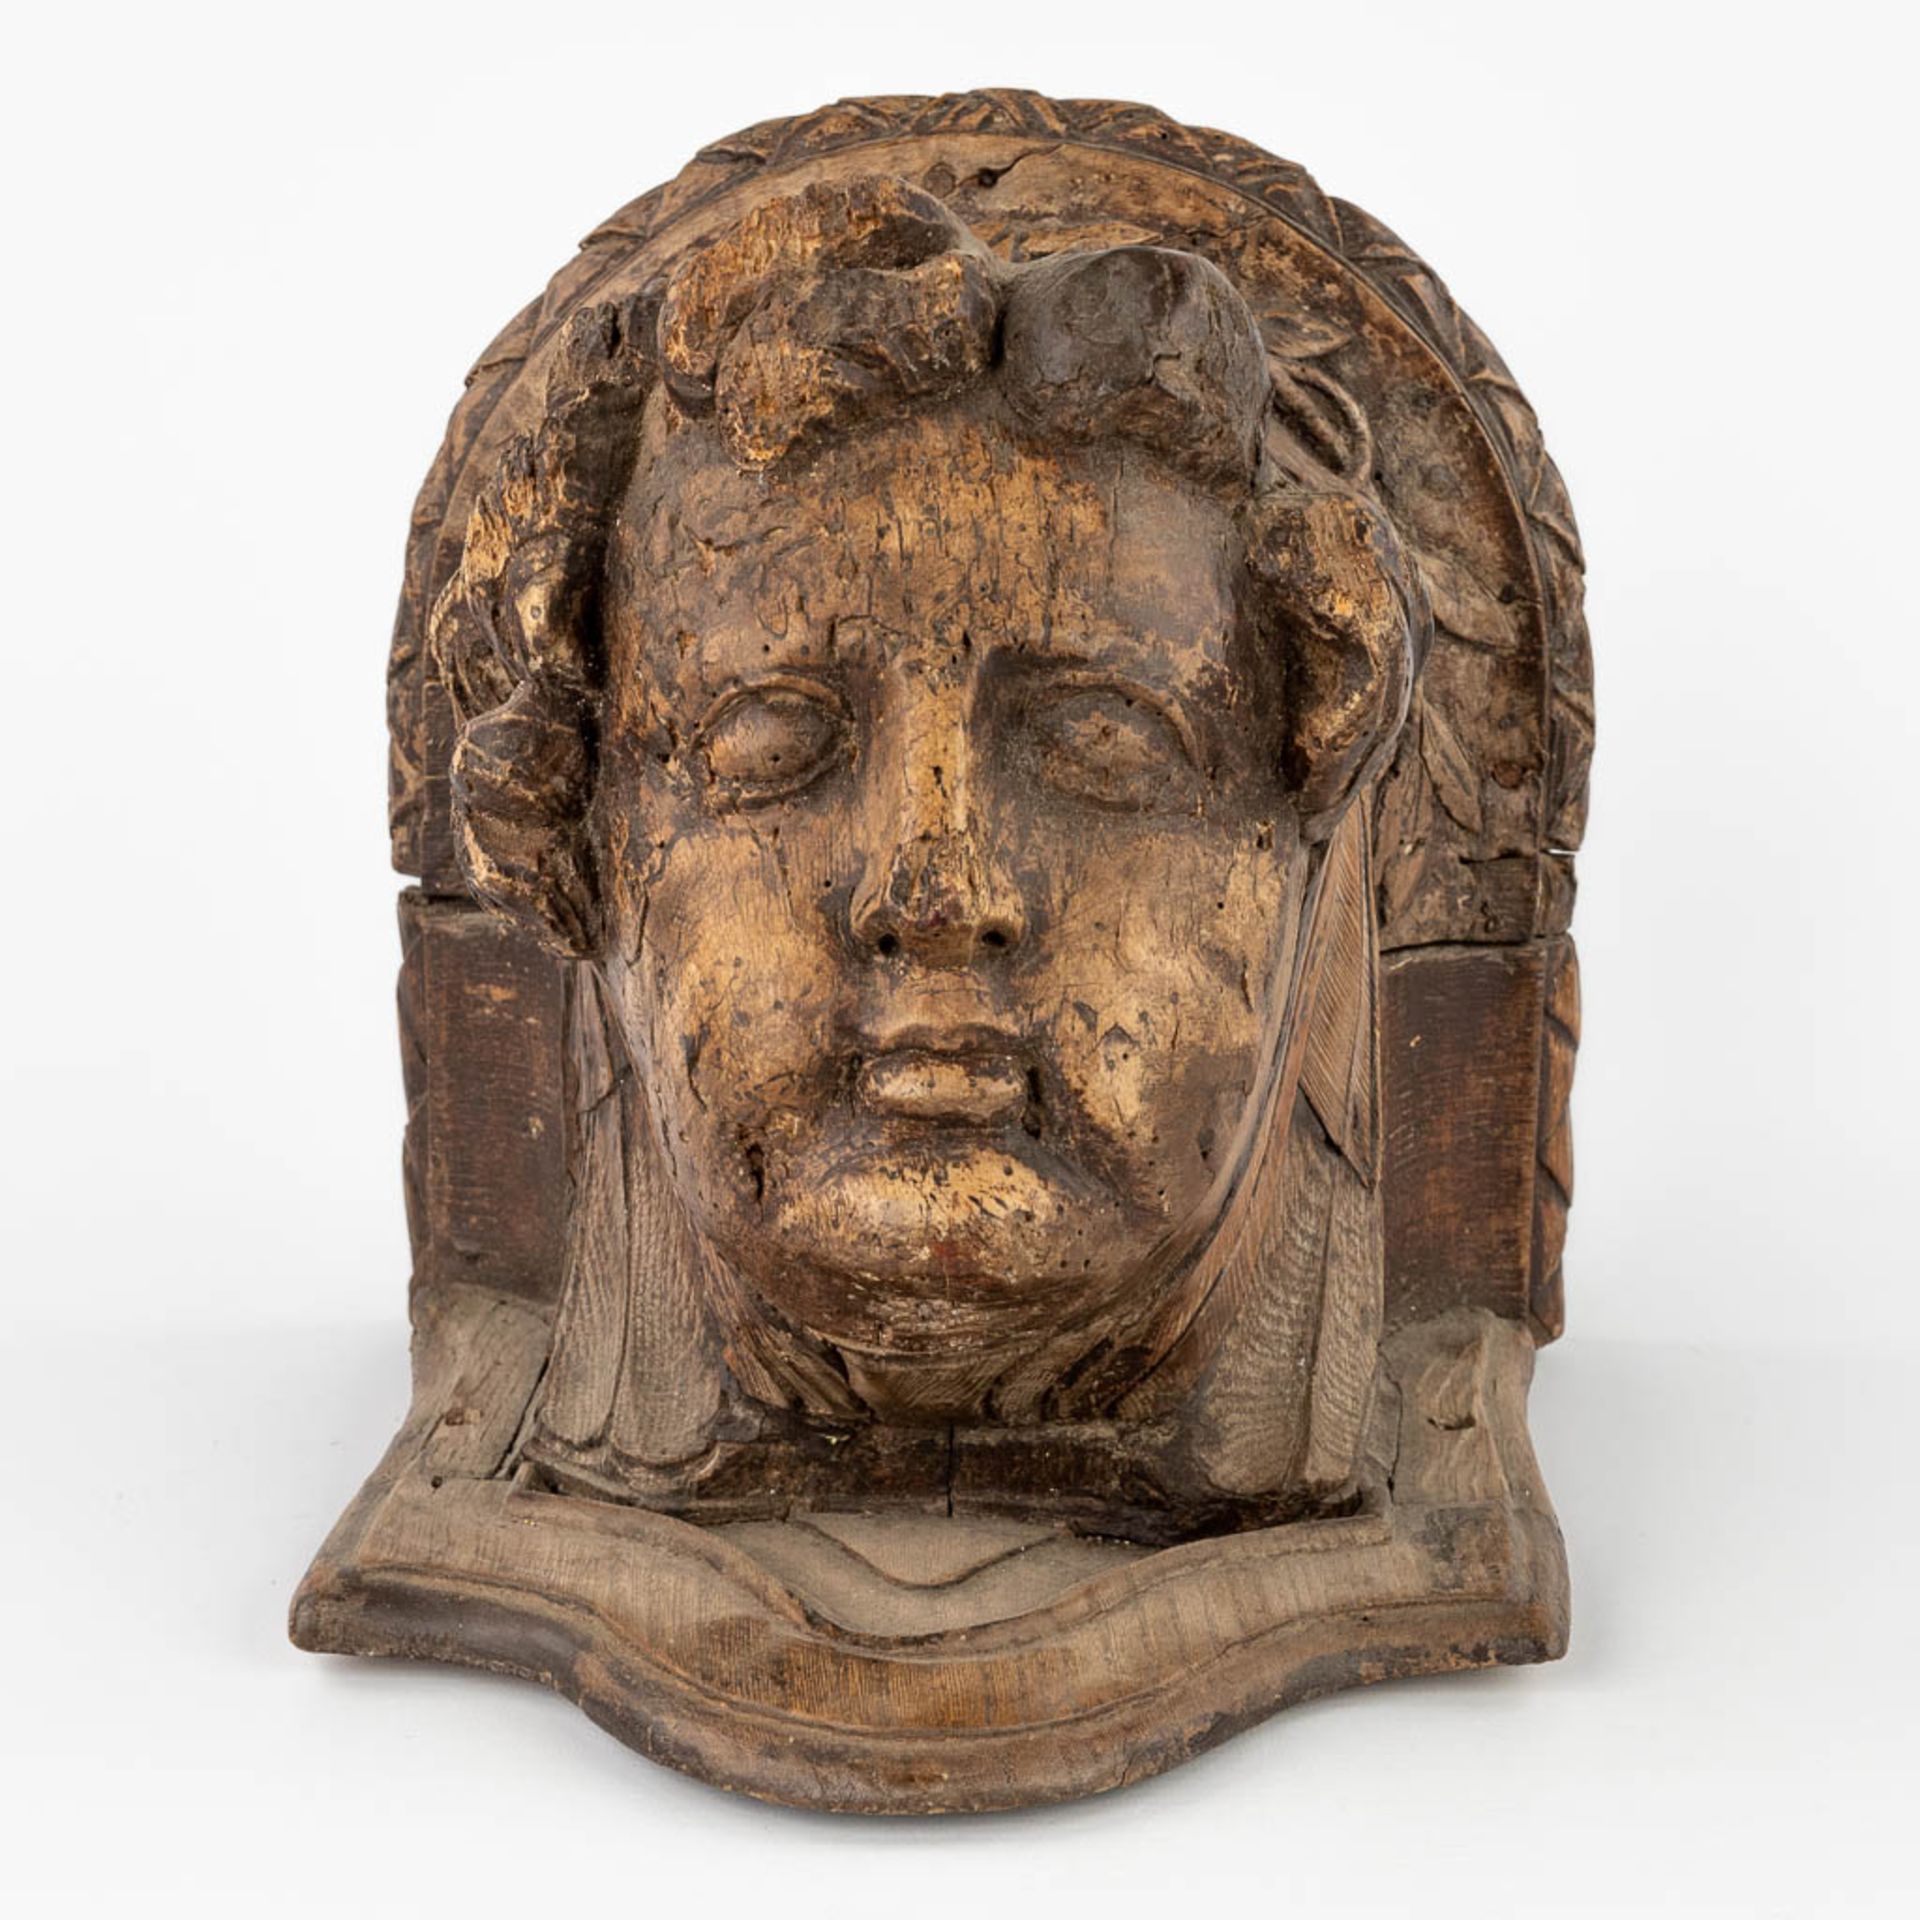 An antique, wood-sculptured corbel with an angel figurine. Oak, 17thC. (L:30 x W:28 x H:27 cm) - Image 3 of 11